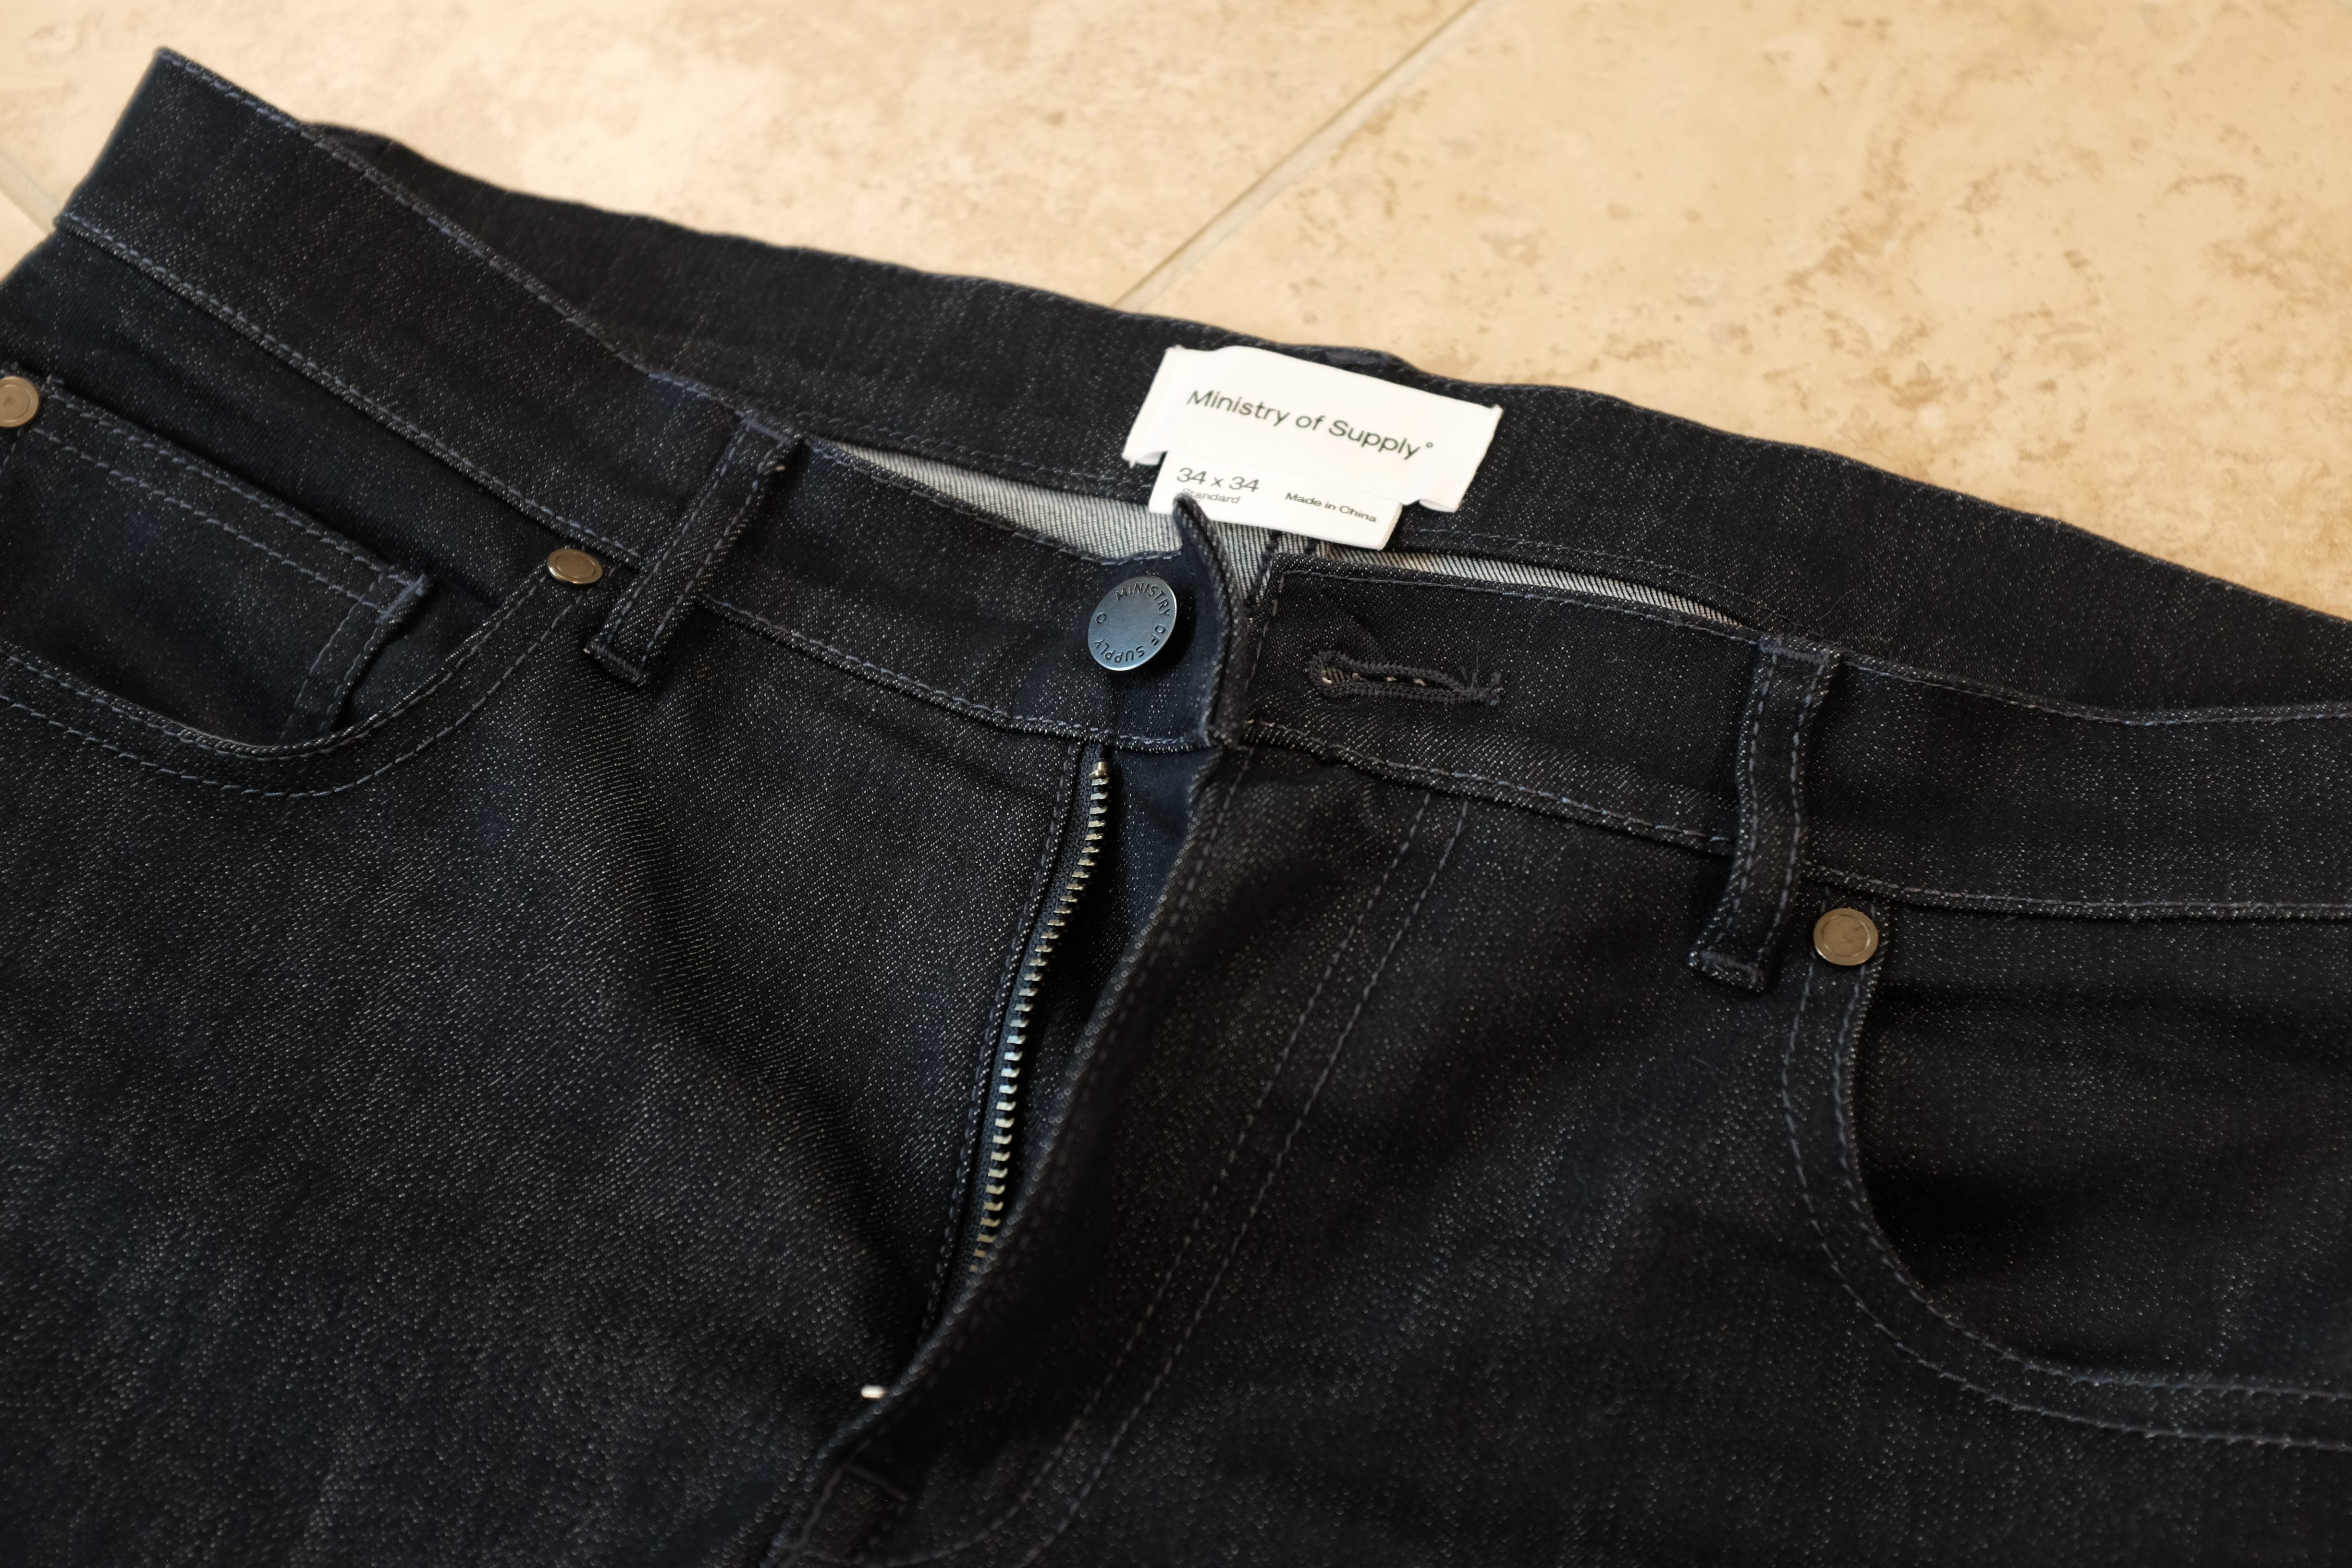 Ministry of Supply Chroma Denim Pants – The Brooks Review